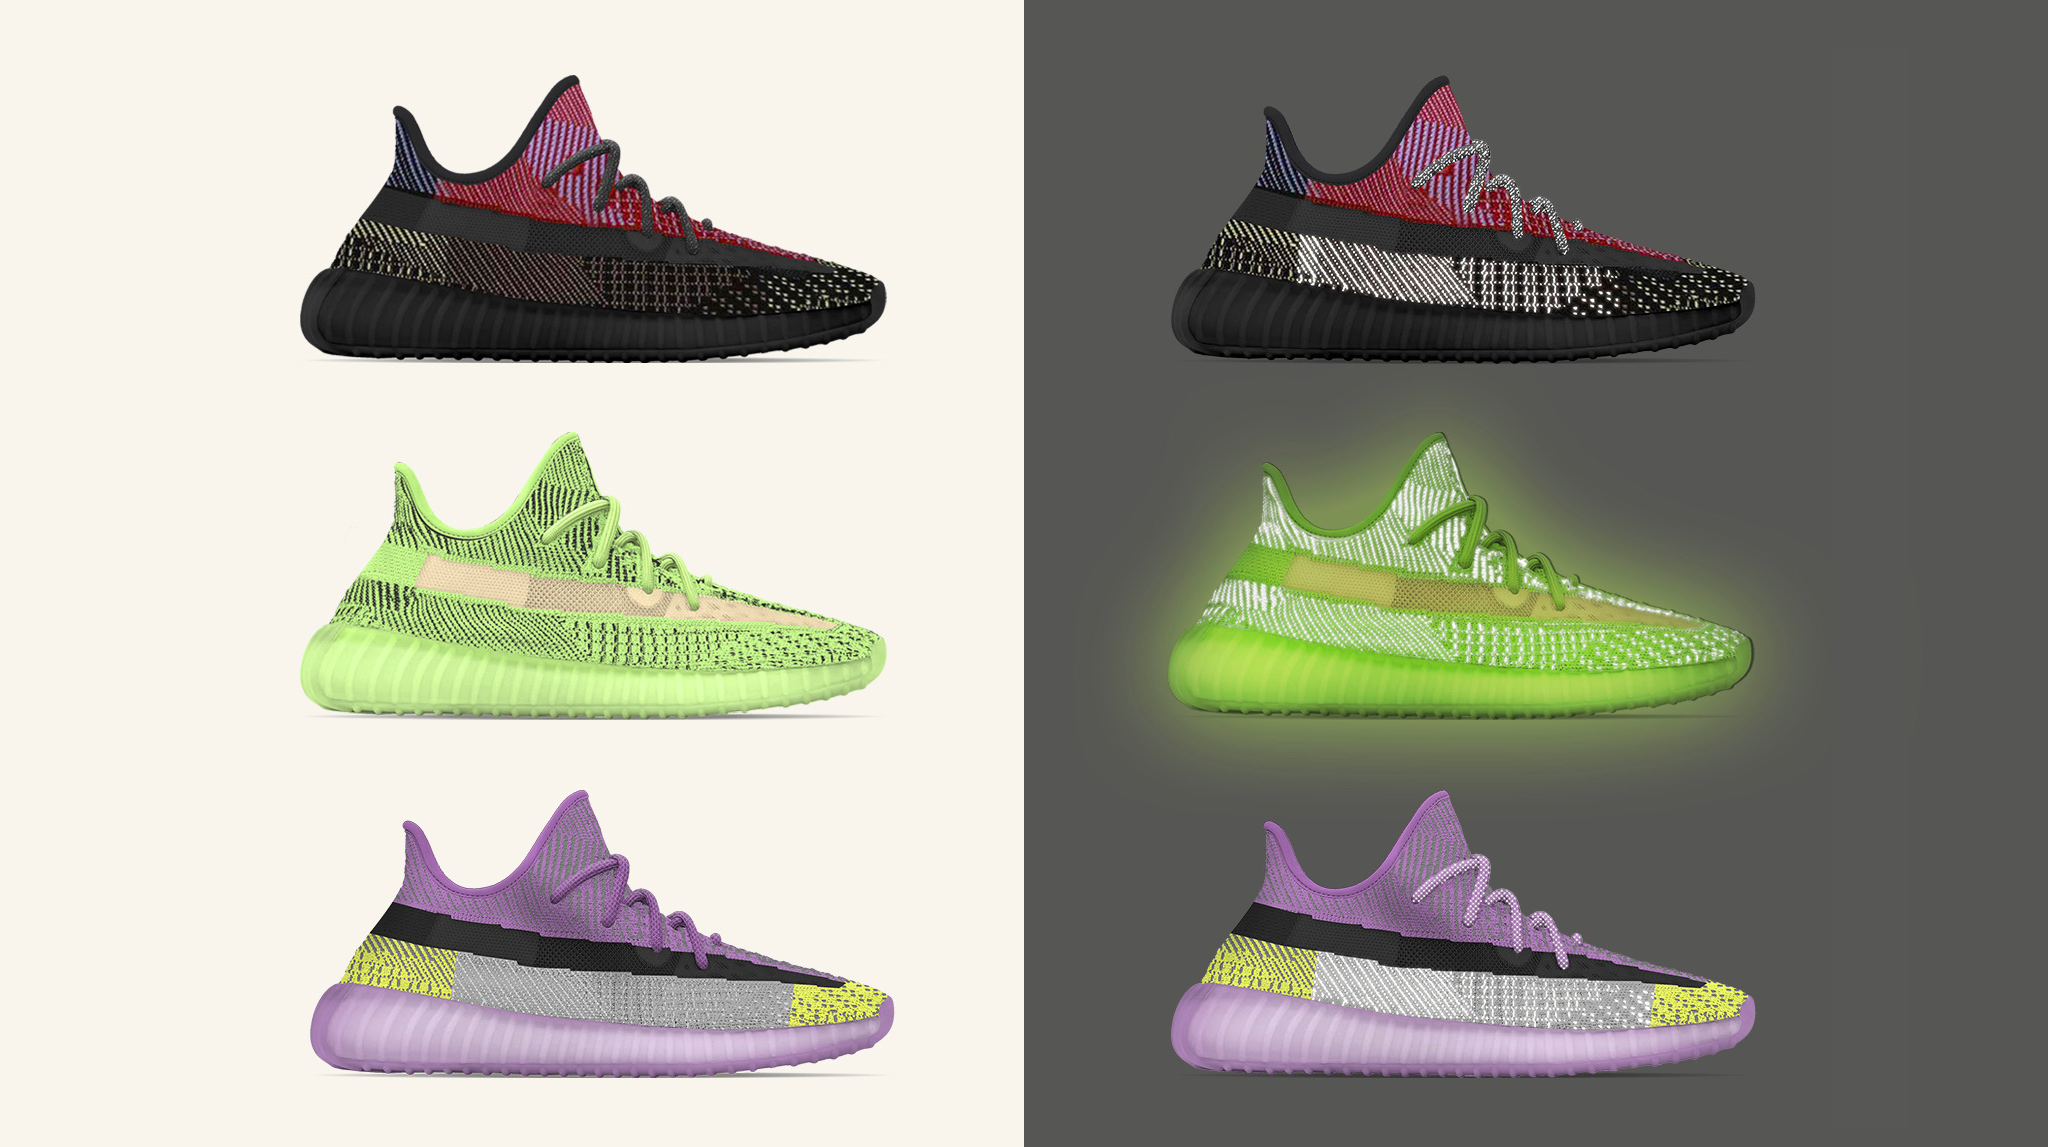 yeezy shoes coming out 2019